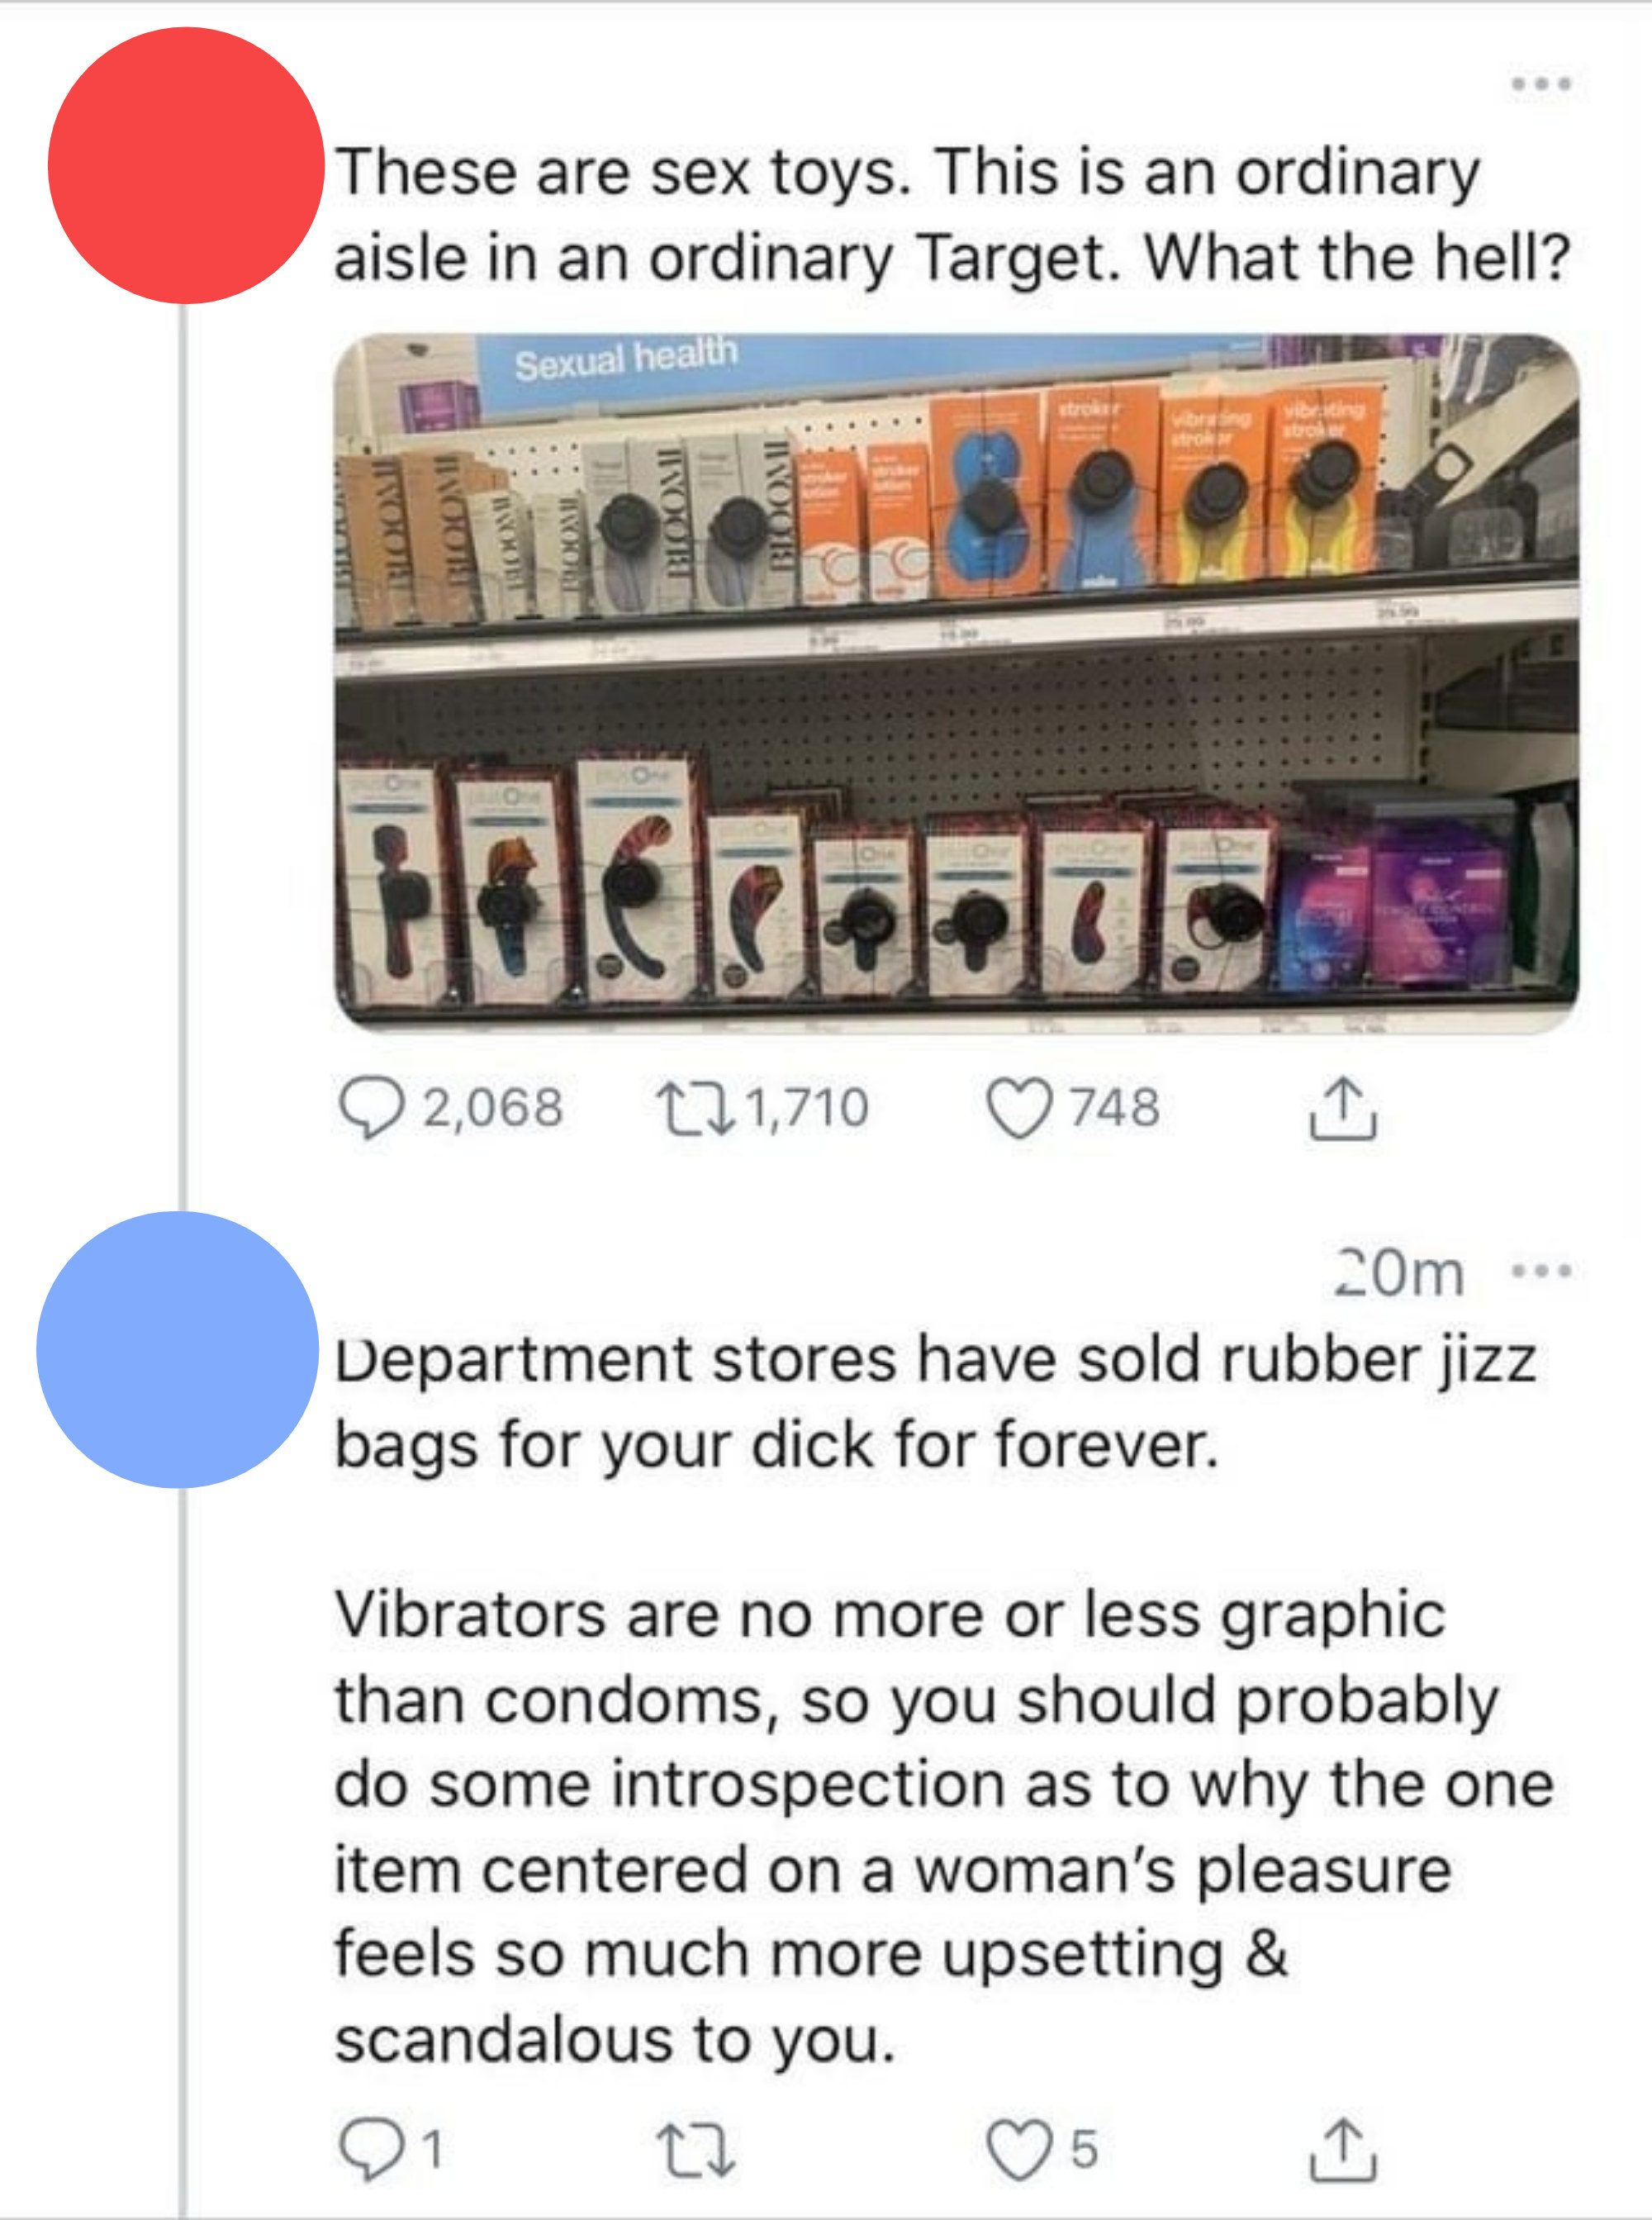 &quot;Department stores have sold rubber jizz bags for your dick for forever.&quot;